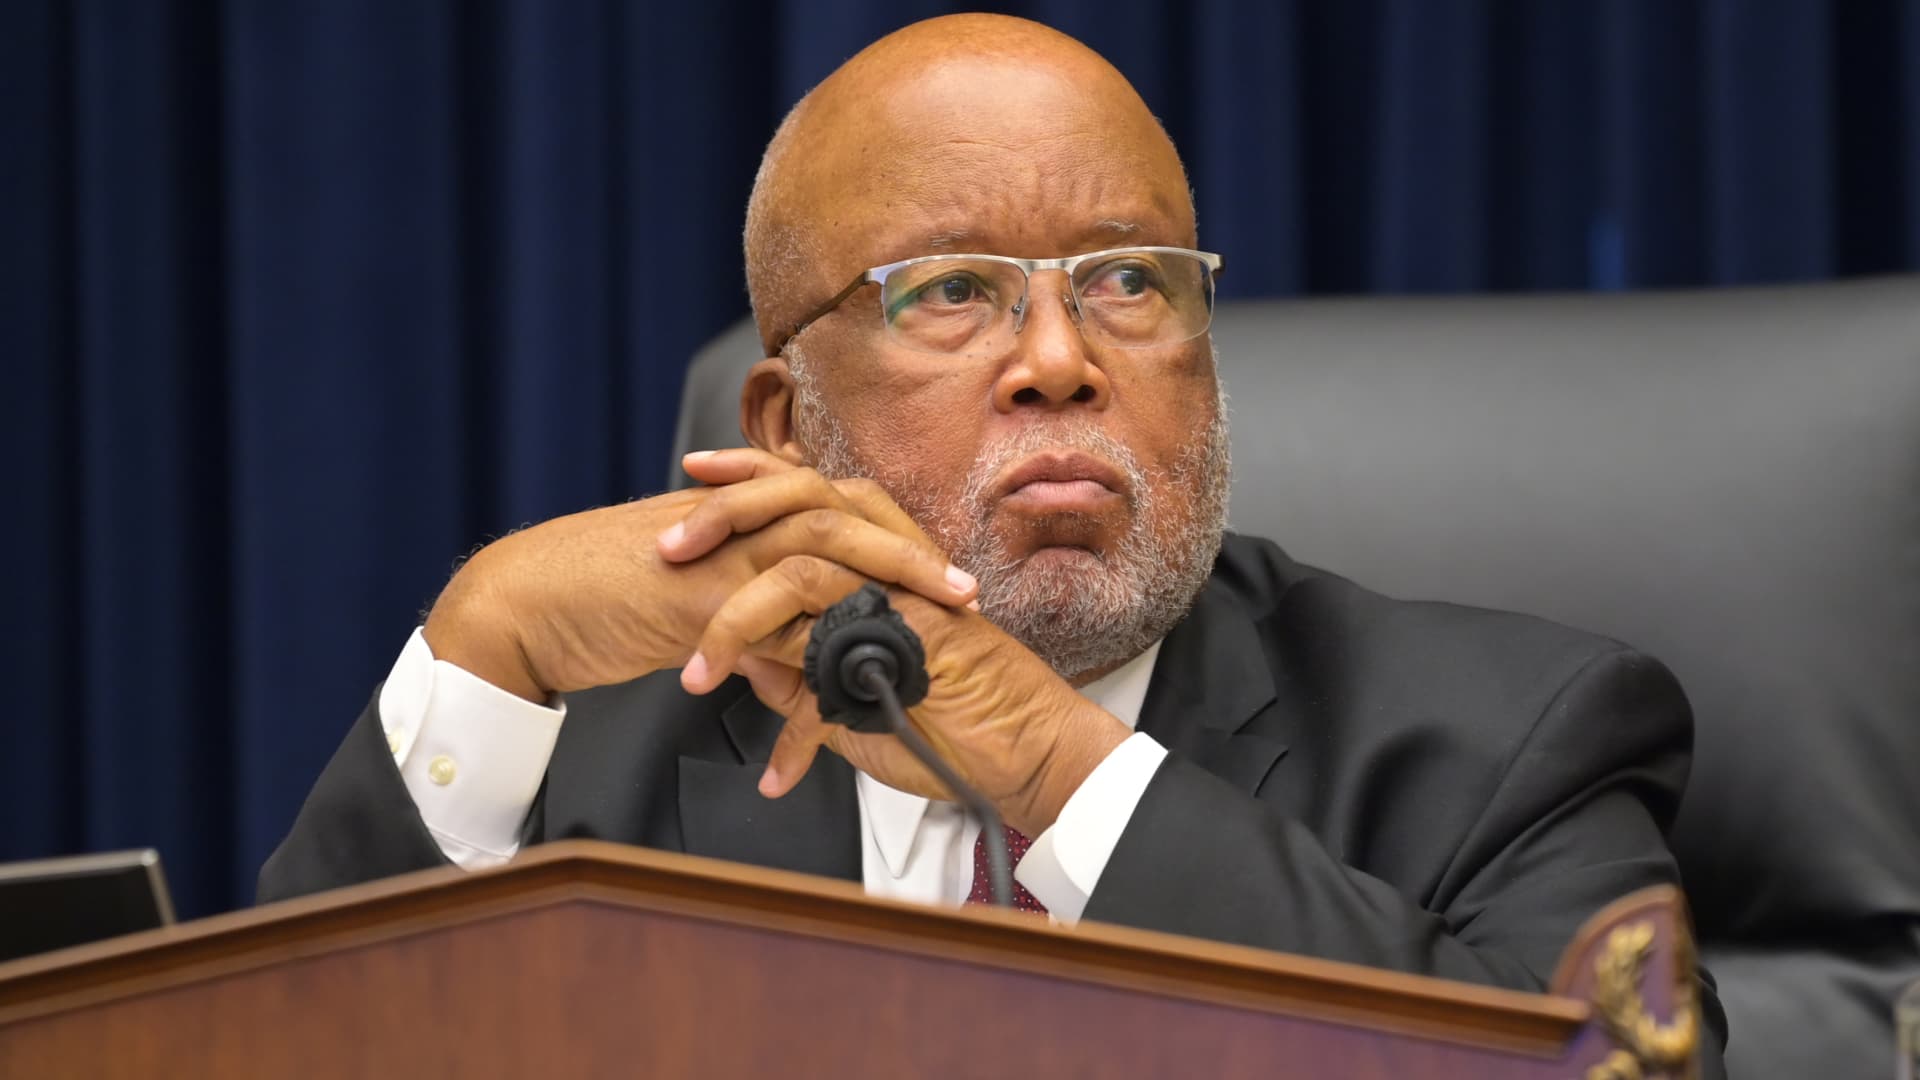 Representative Bennie Thompson, a Democrat from Mississippi and chairman of the House Homeland Security Committee, listens during a hearing in Washington, D.C., U.S., on Thursday, Sept. 17, 2020.